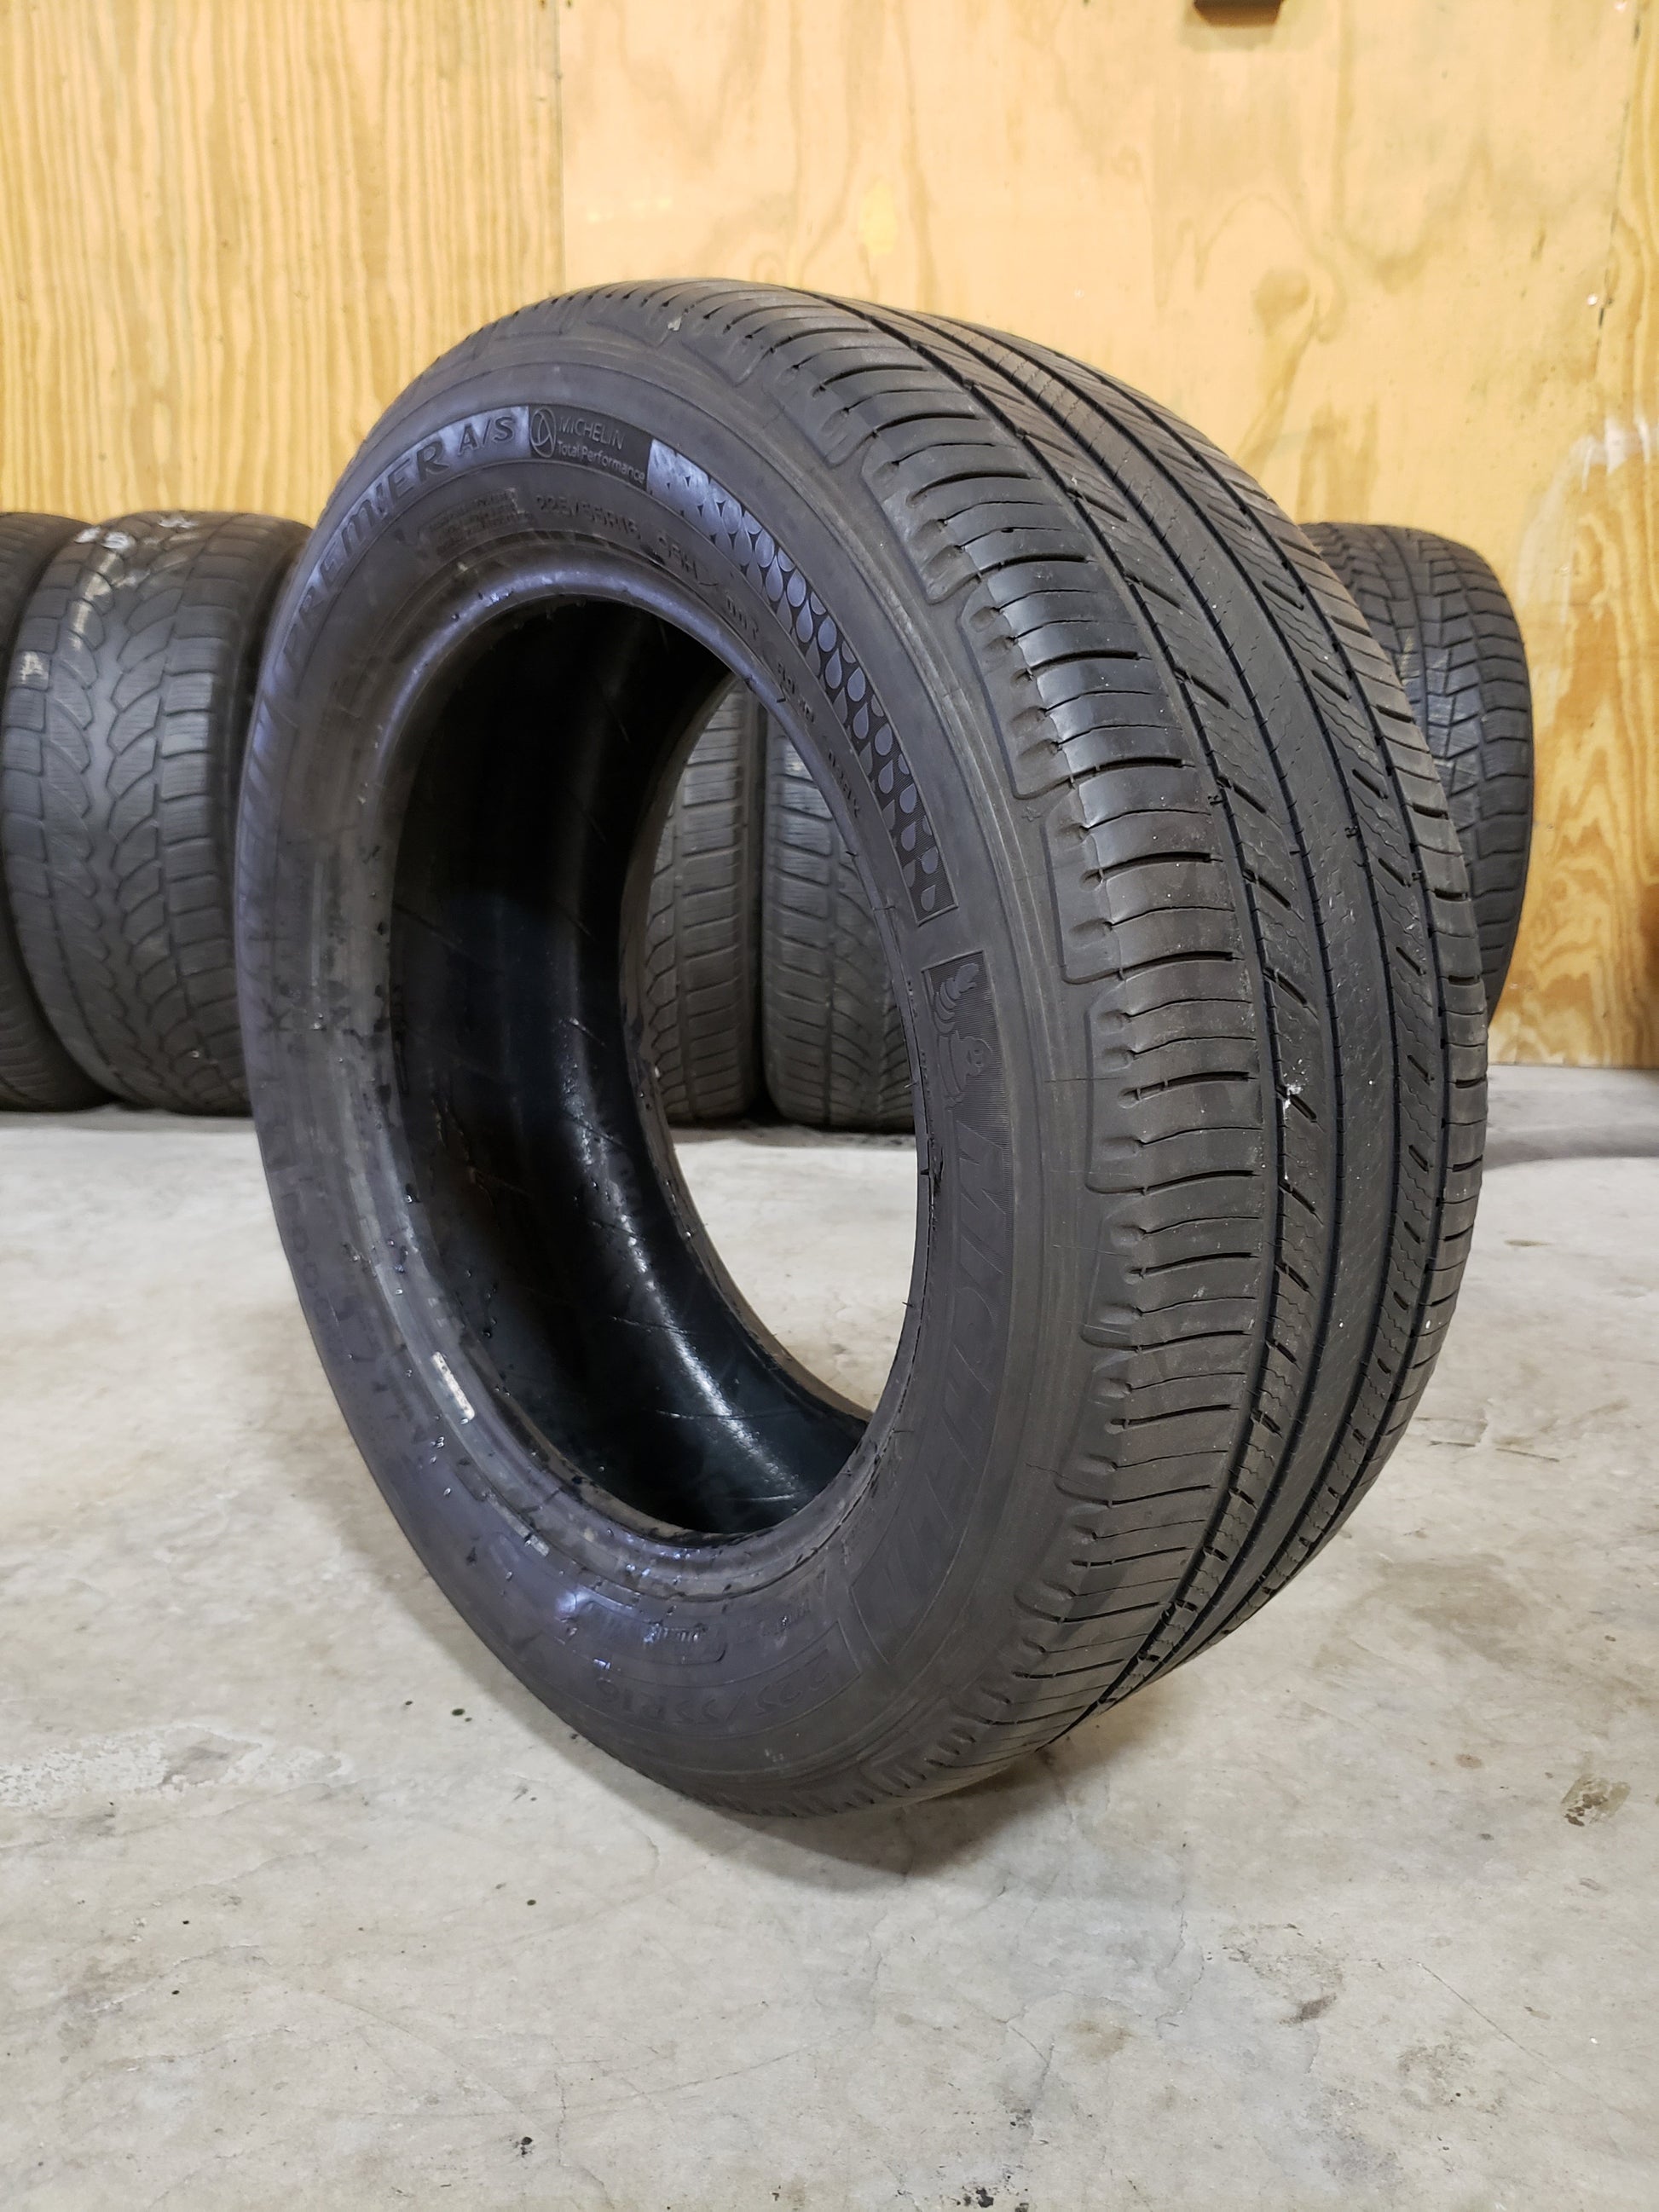 SINGLE 225/55R16 Michelin Premier A/S 95H XL - Used Tires